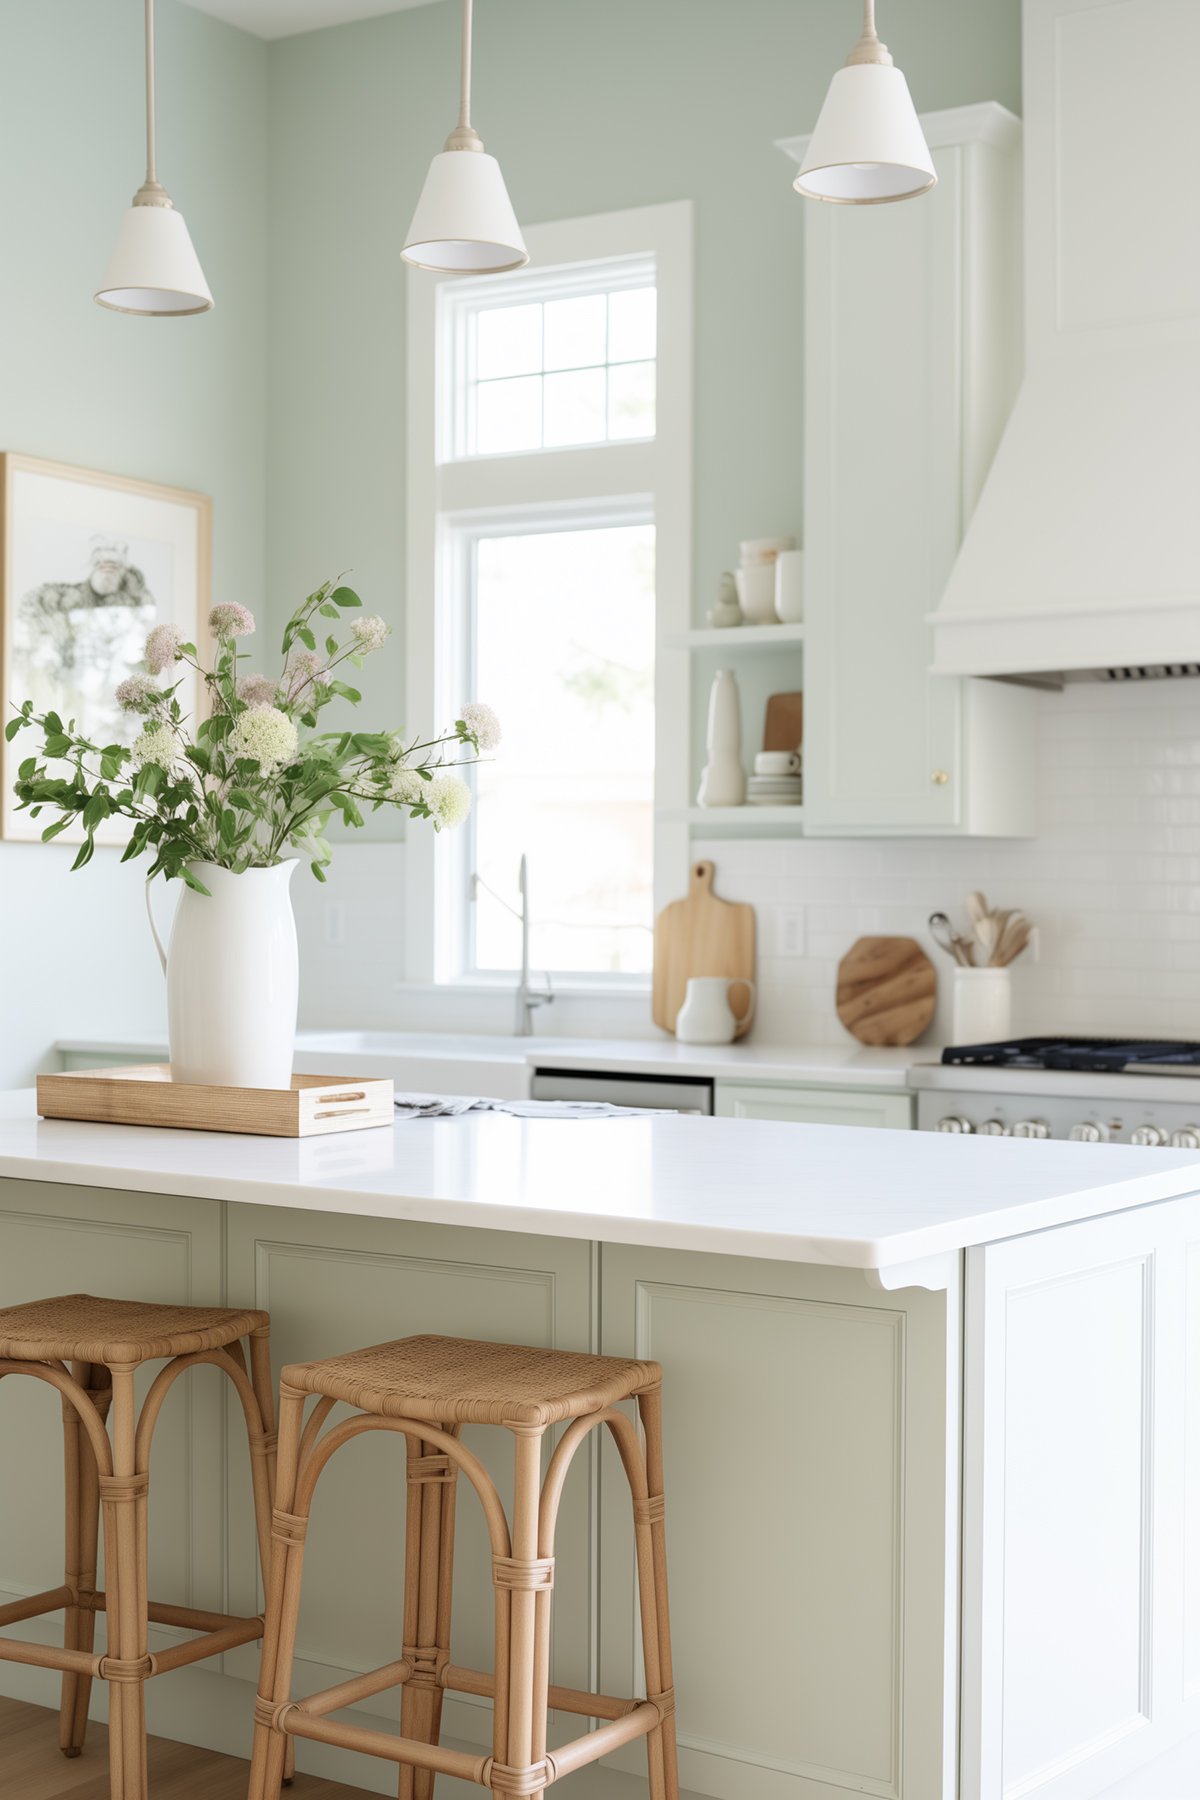 10 Paint Colors You’ll Love For Your Small Kitchen